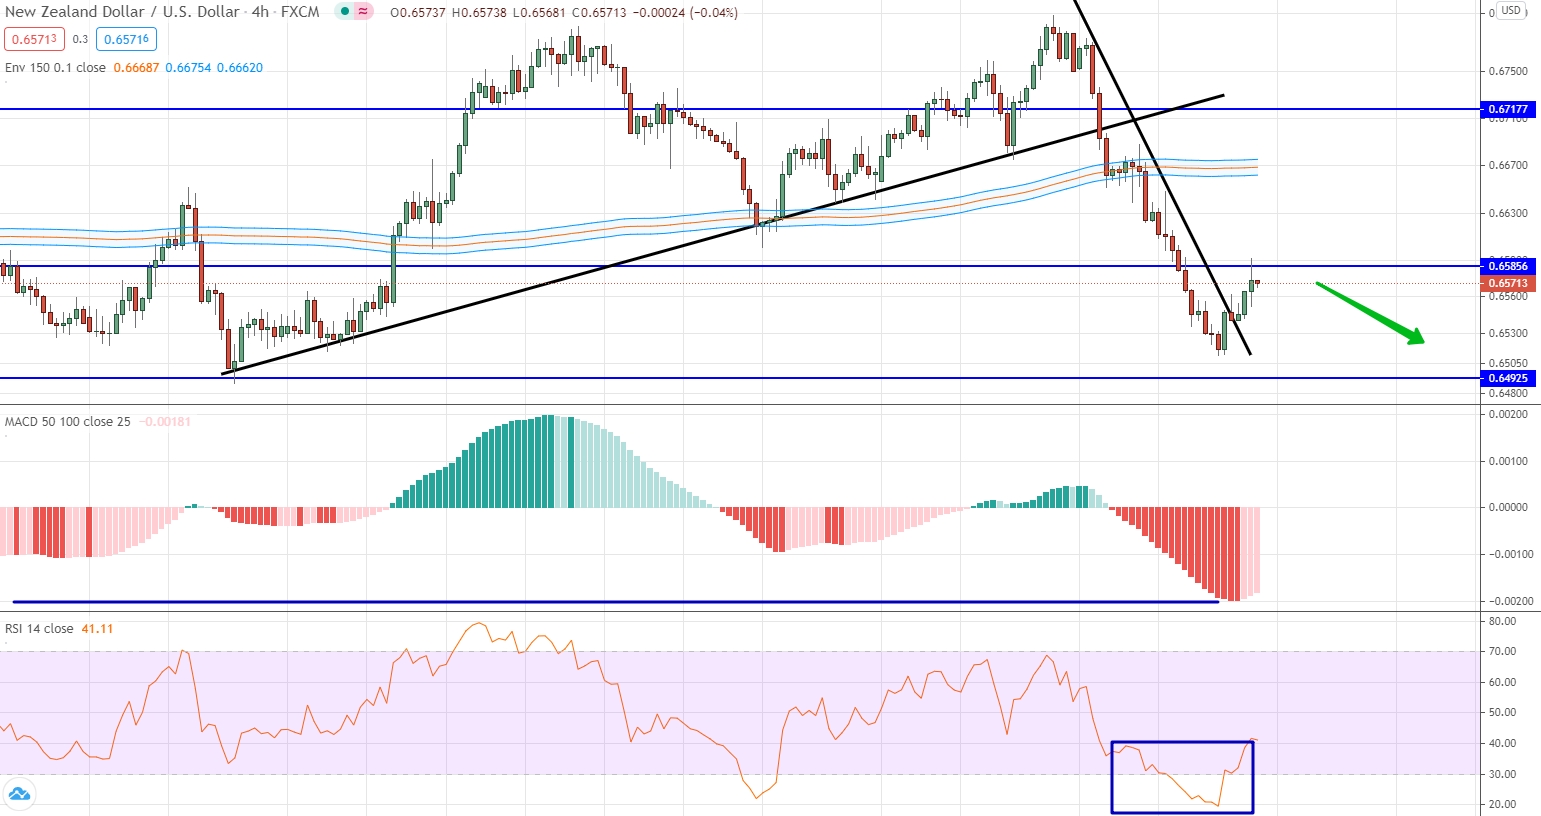 Forex Weekly Forecast & FX Analysis September 28 - October 2